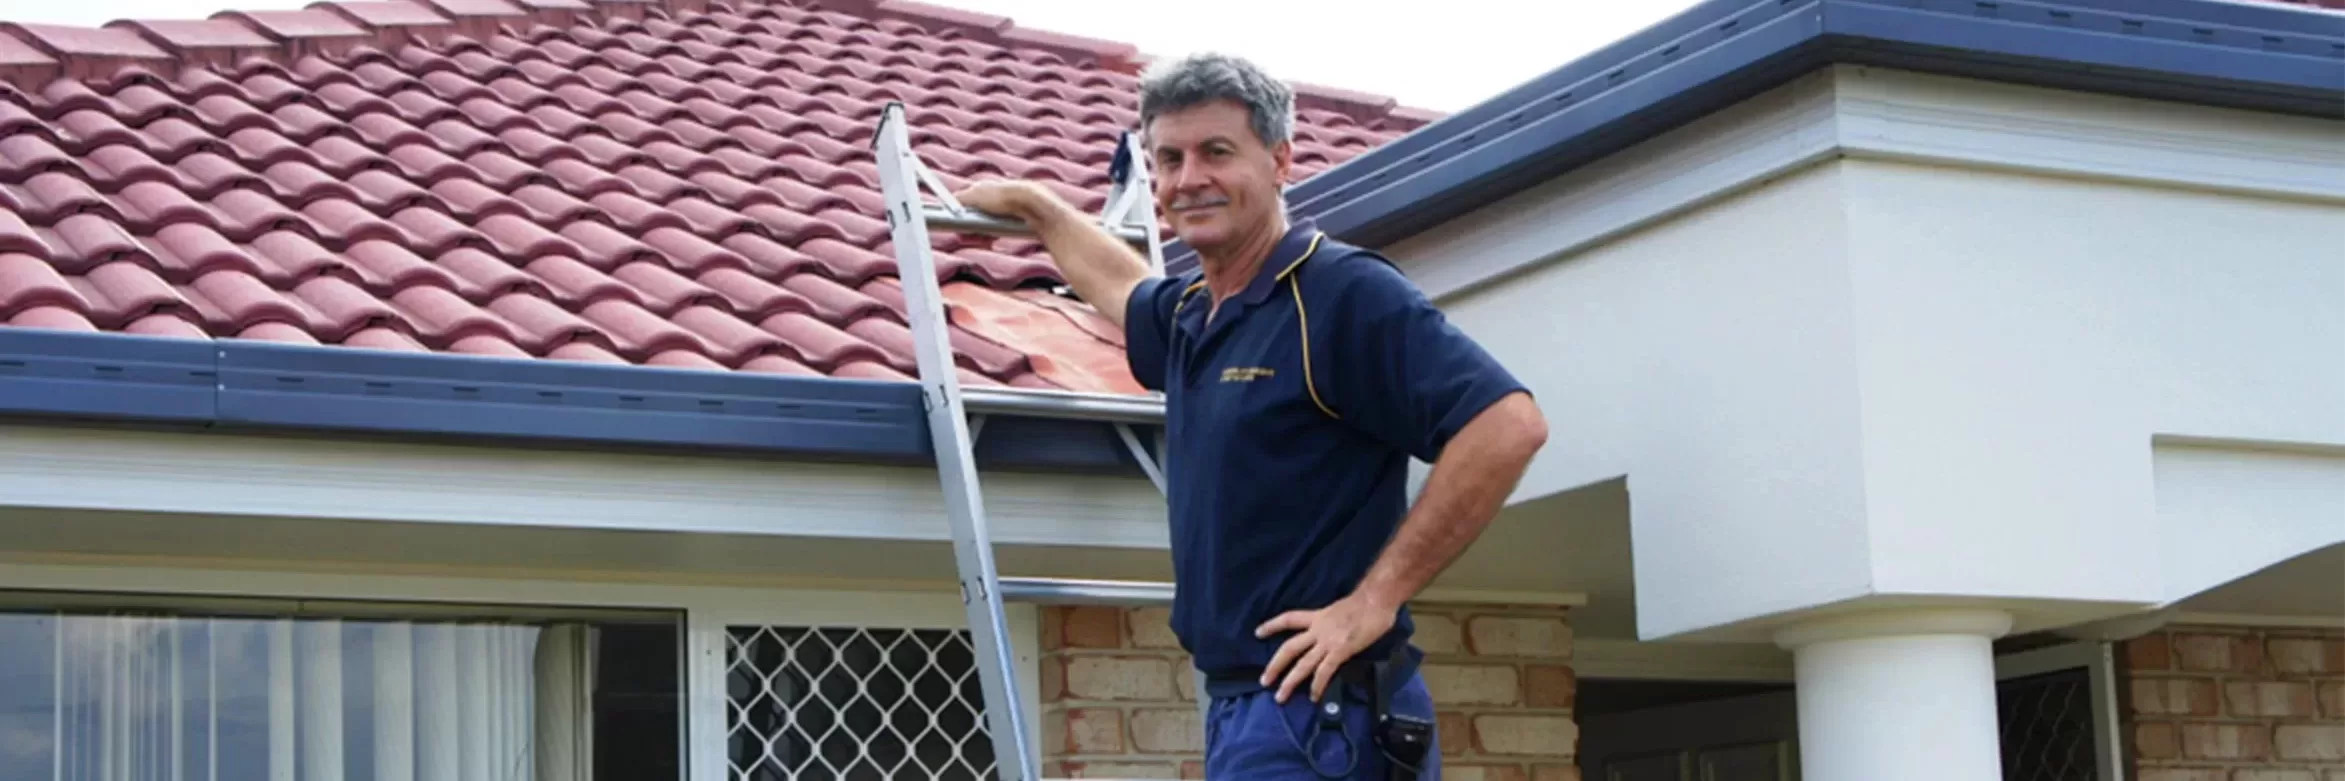 Pre-Purchase Building Inspection Costs on the Sunshine Coast